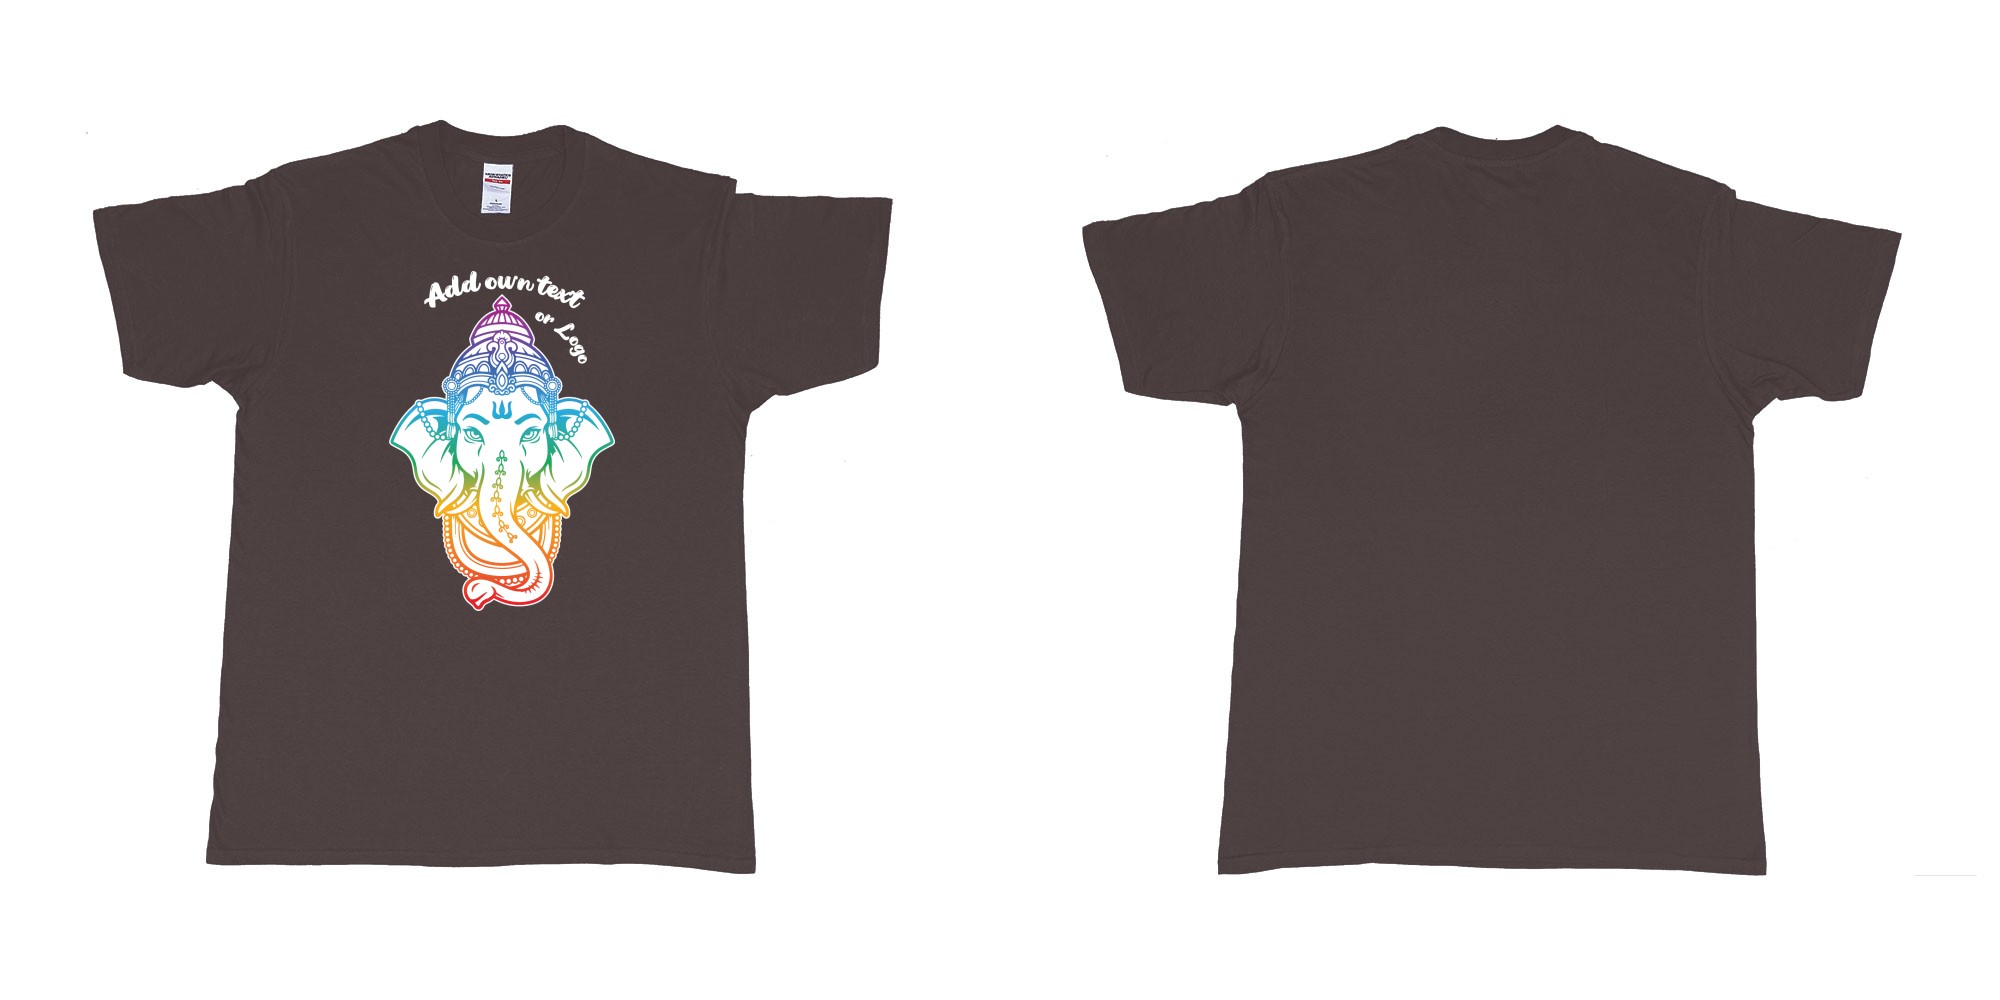 Custom tshirt design ganesha rainbow custom printing in fabric color dark-chocolate choice your own text made in Bali by The Pirate Way